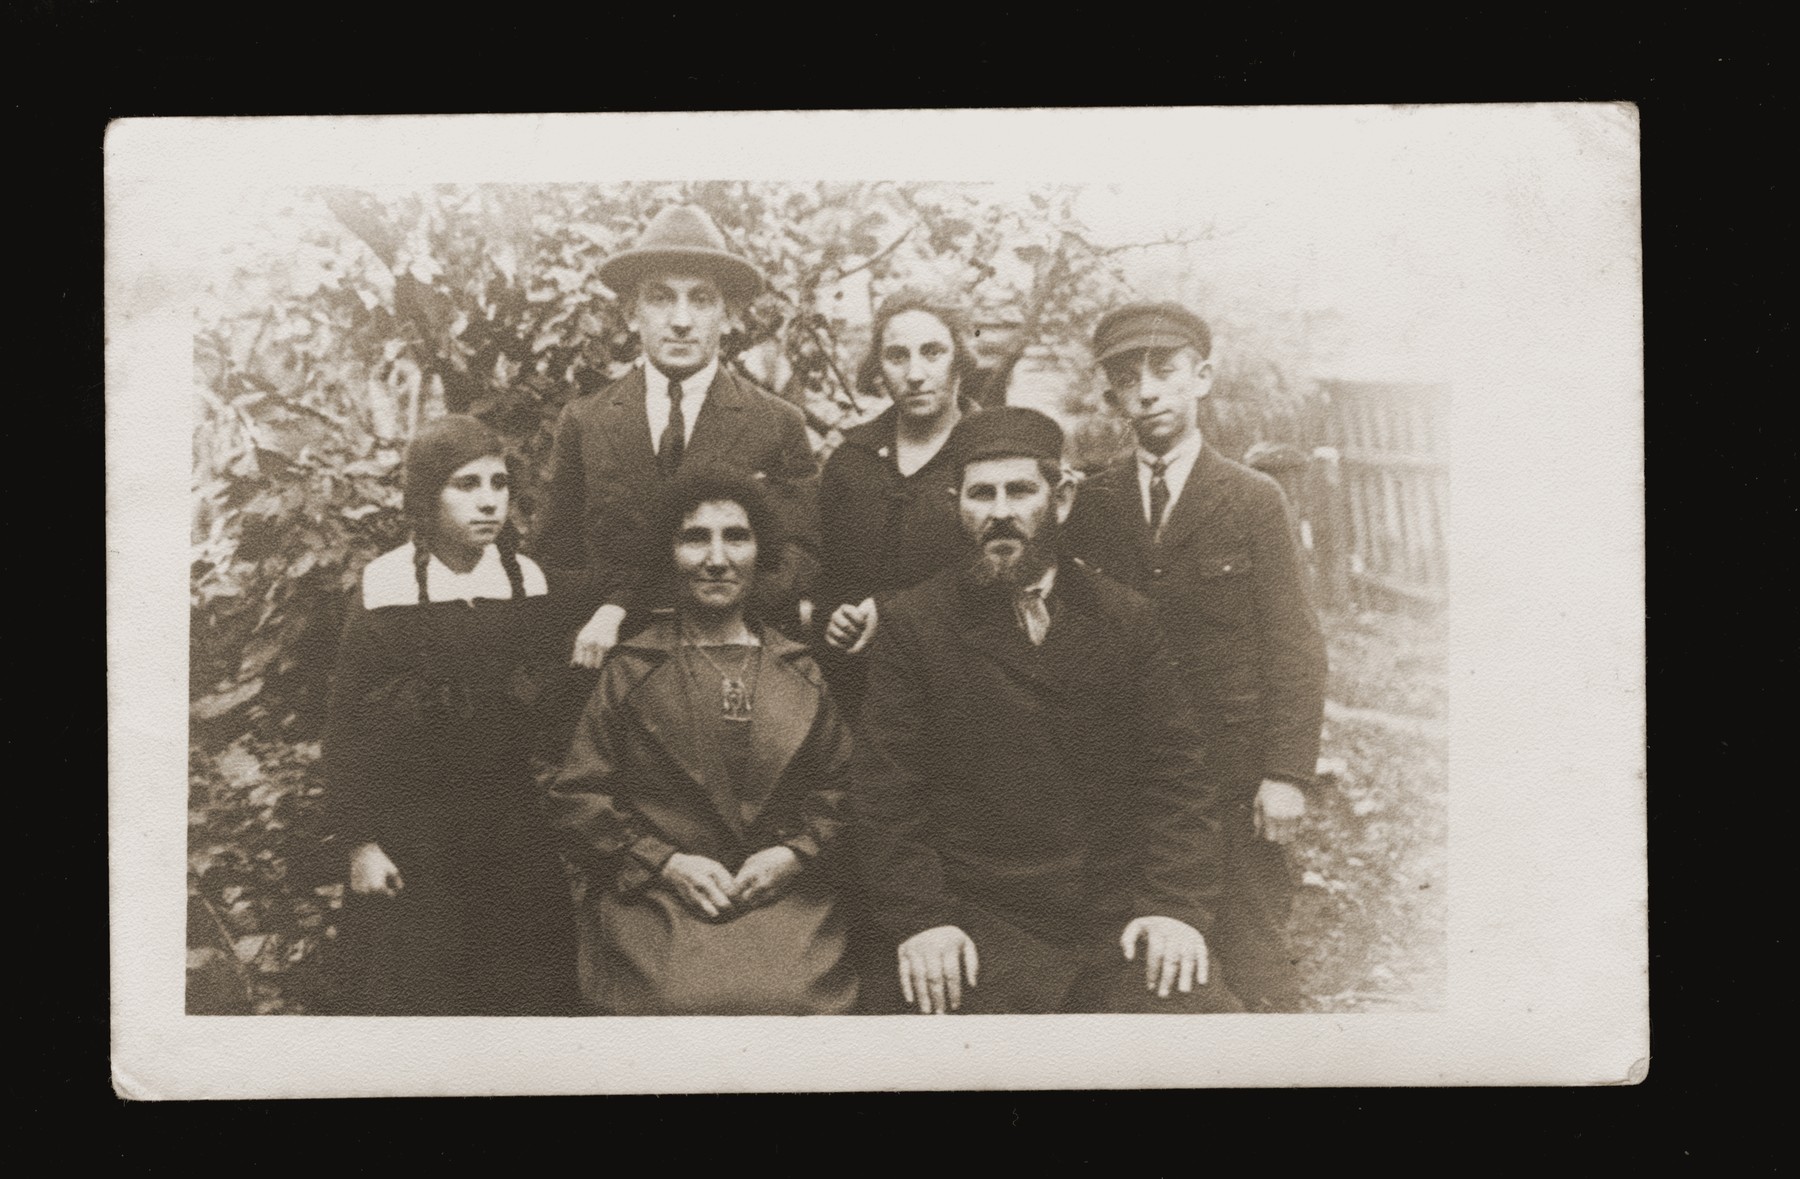 Portrait of the Gerlic family in their garden in Bedzin.

Pictured are Zishe Gerlic, his wife Sheine Esther, daughters Beltsha and Chava, and sons Velvel and Yehiel.